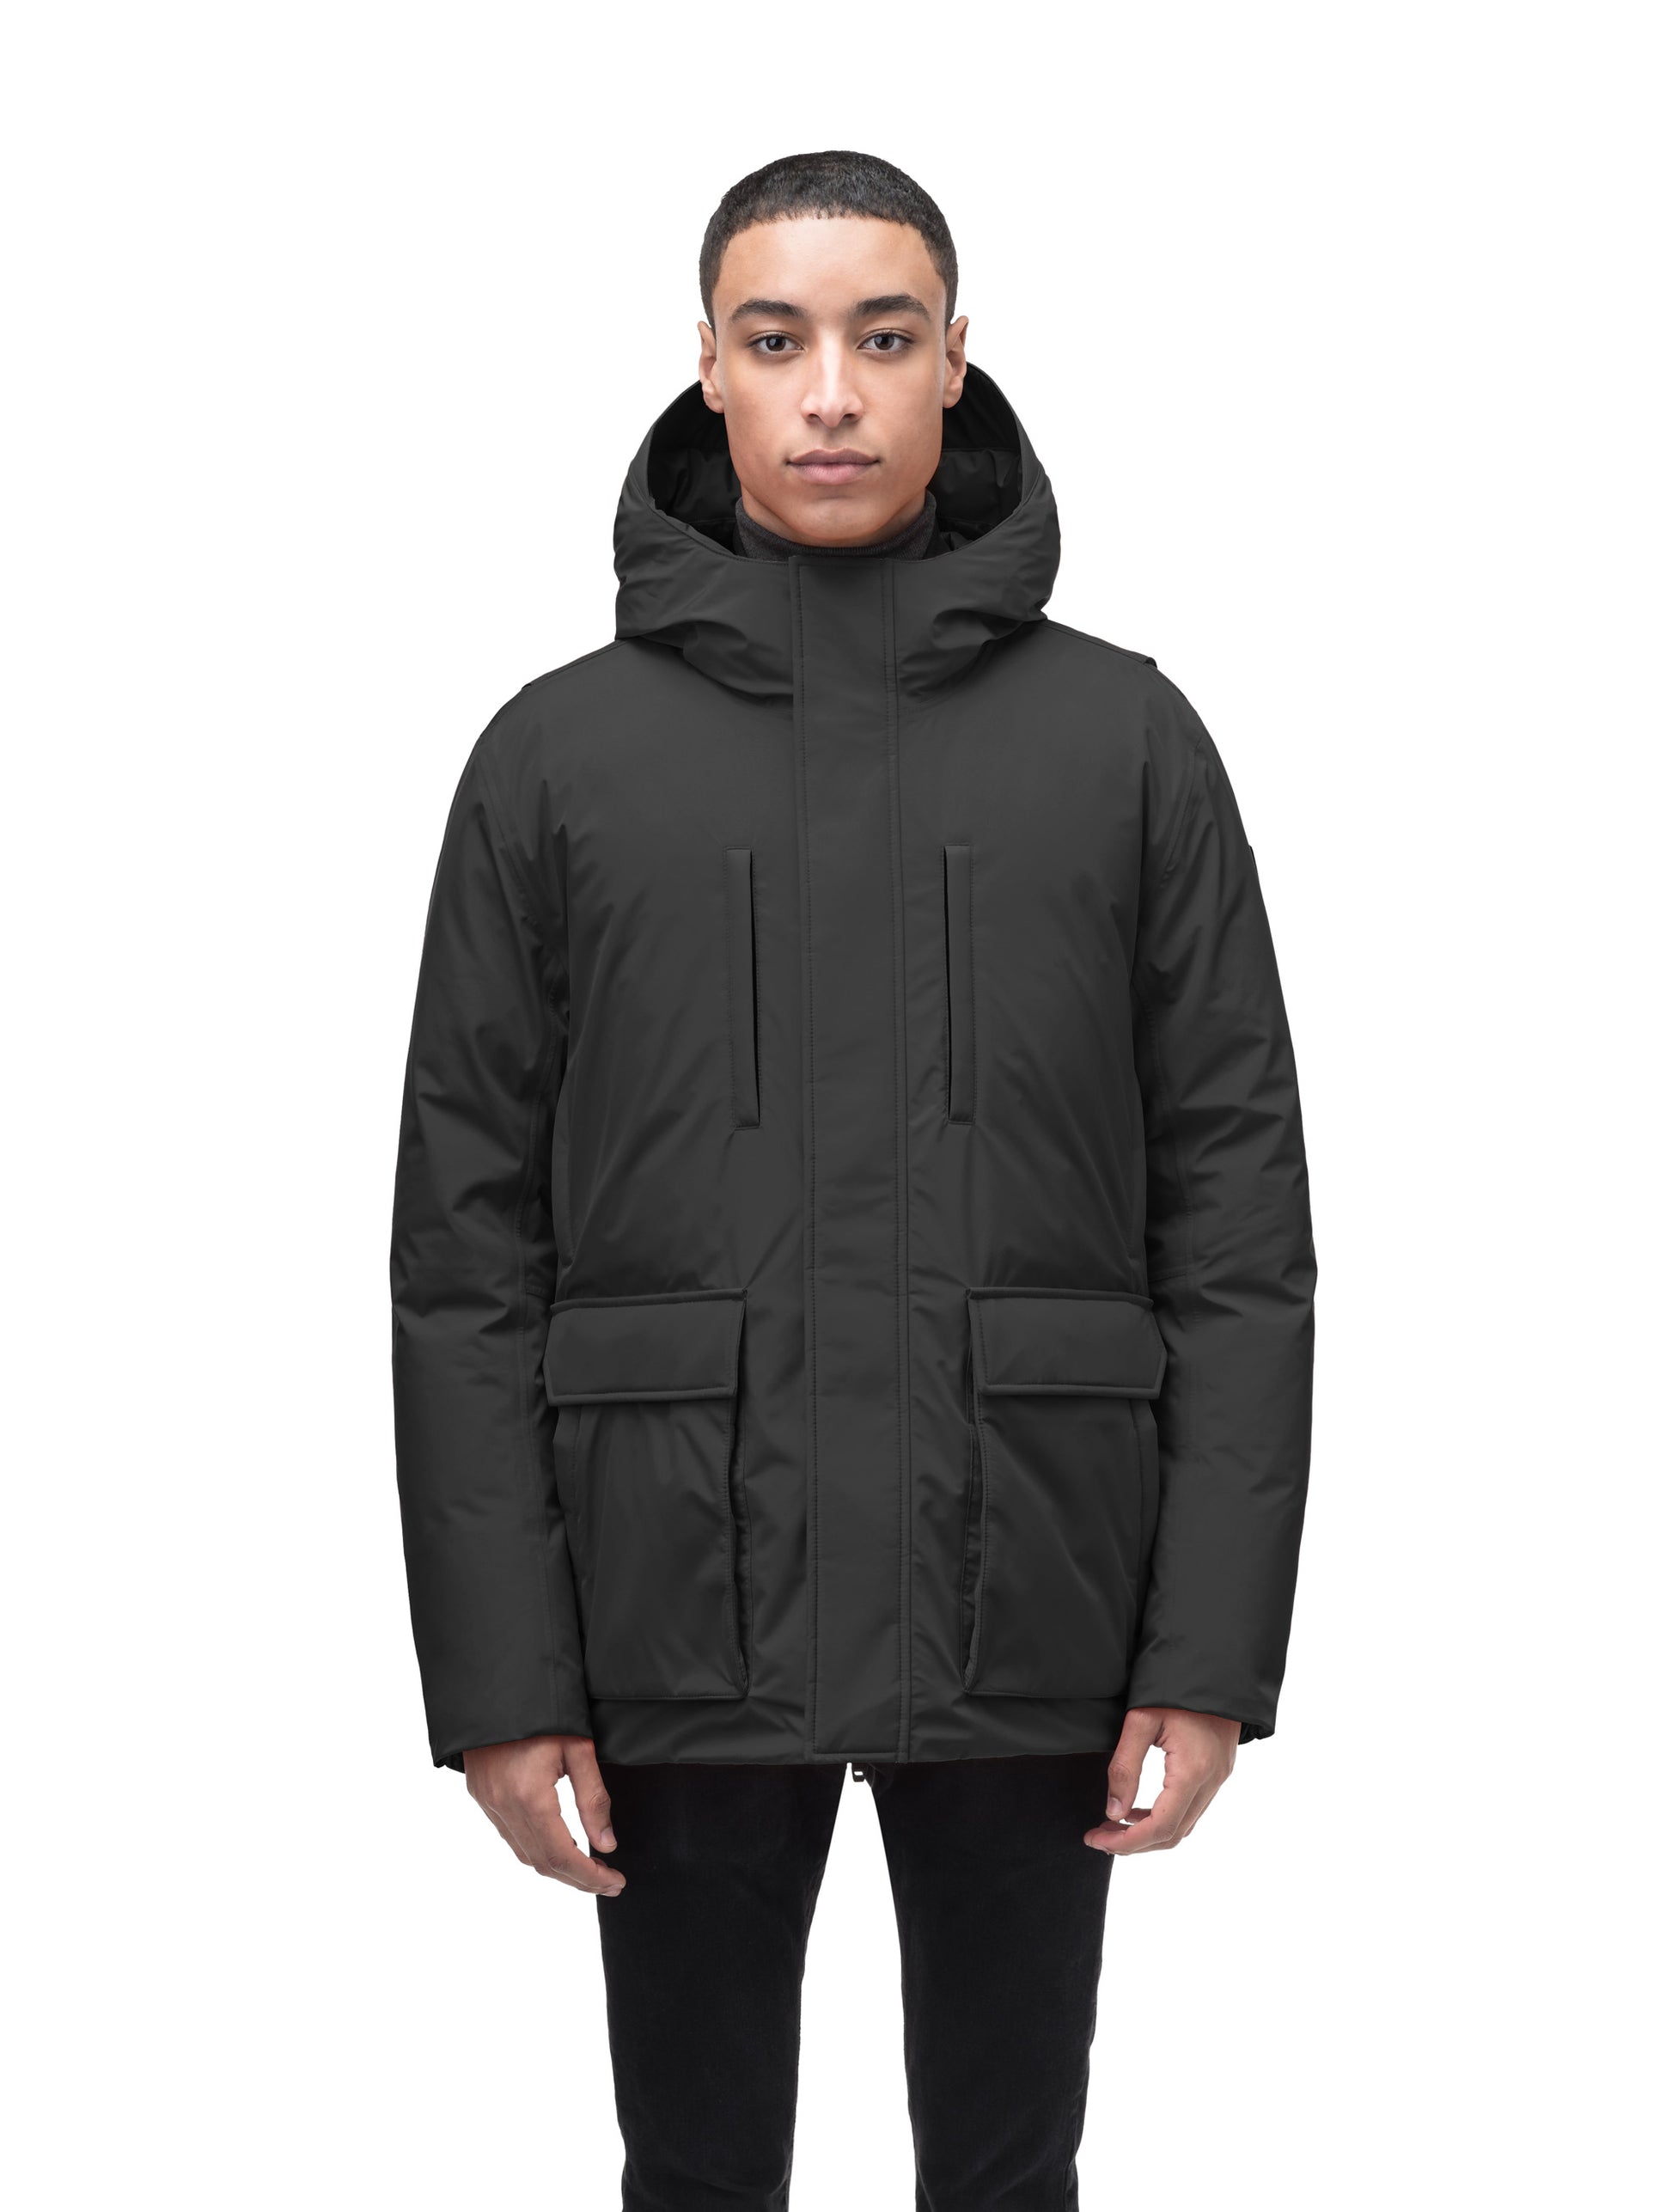 Geo Men's Short Parka in hip length, Canadian duck down insulation, non-removable hood, and two-way zipper, in Black